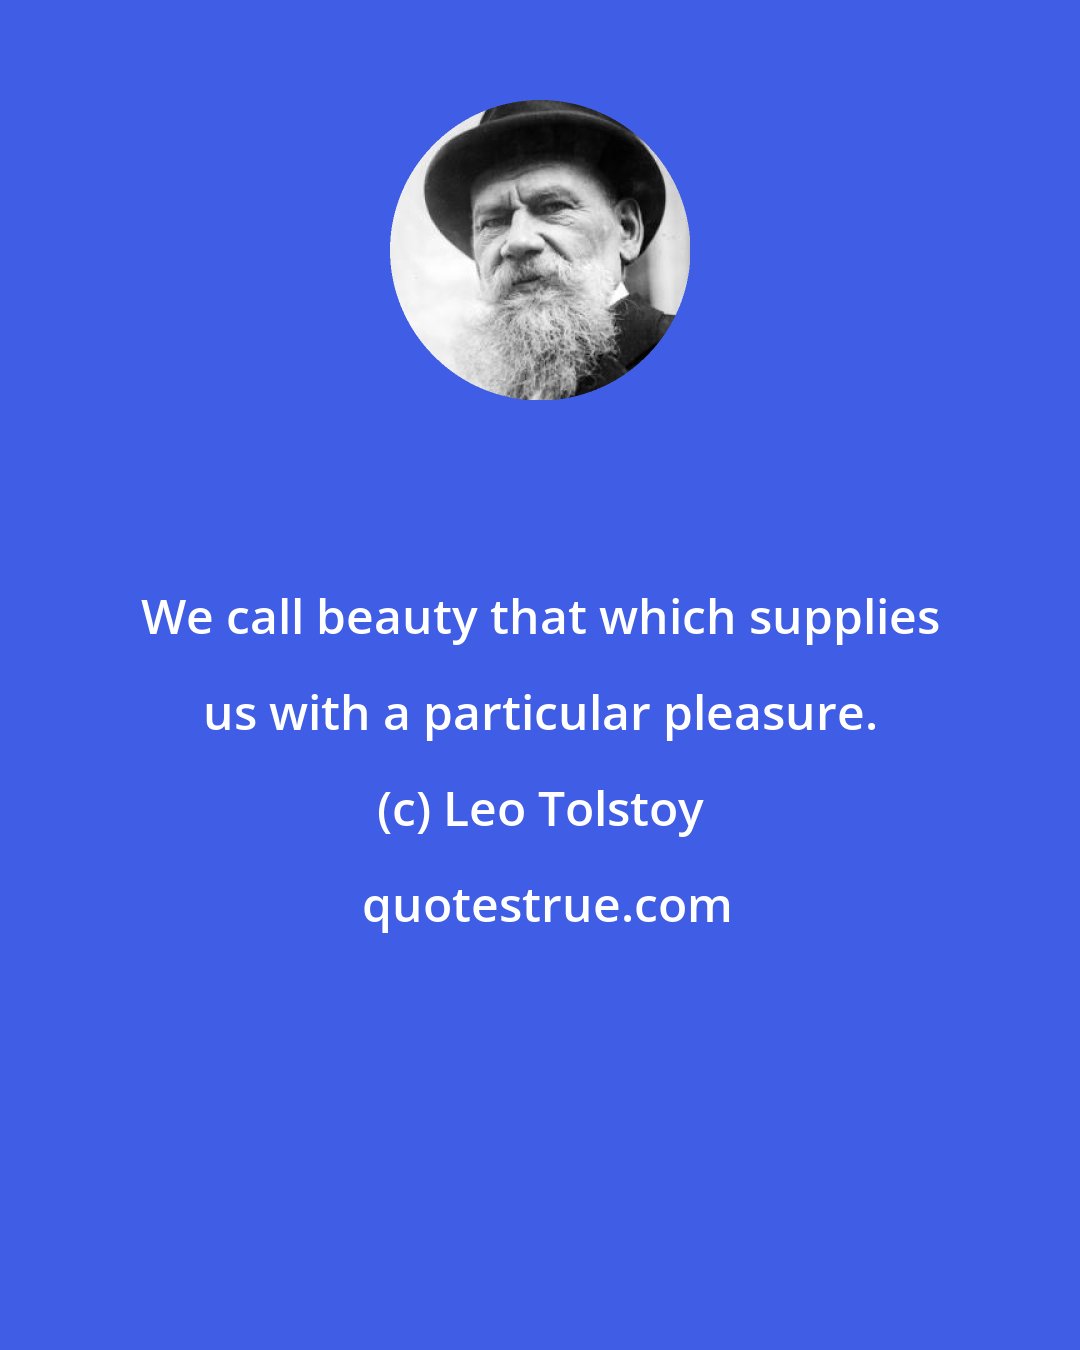 Leo Tolstoy: We call beauty that which supplies us with a particular pleasure.